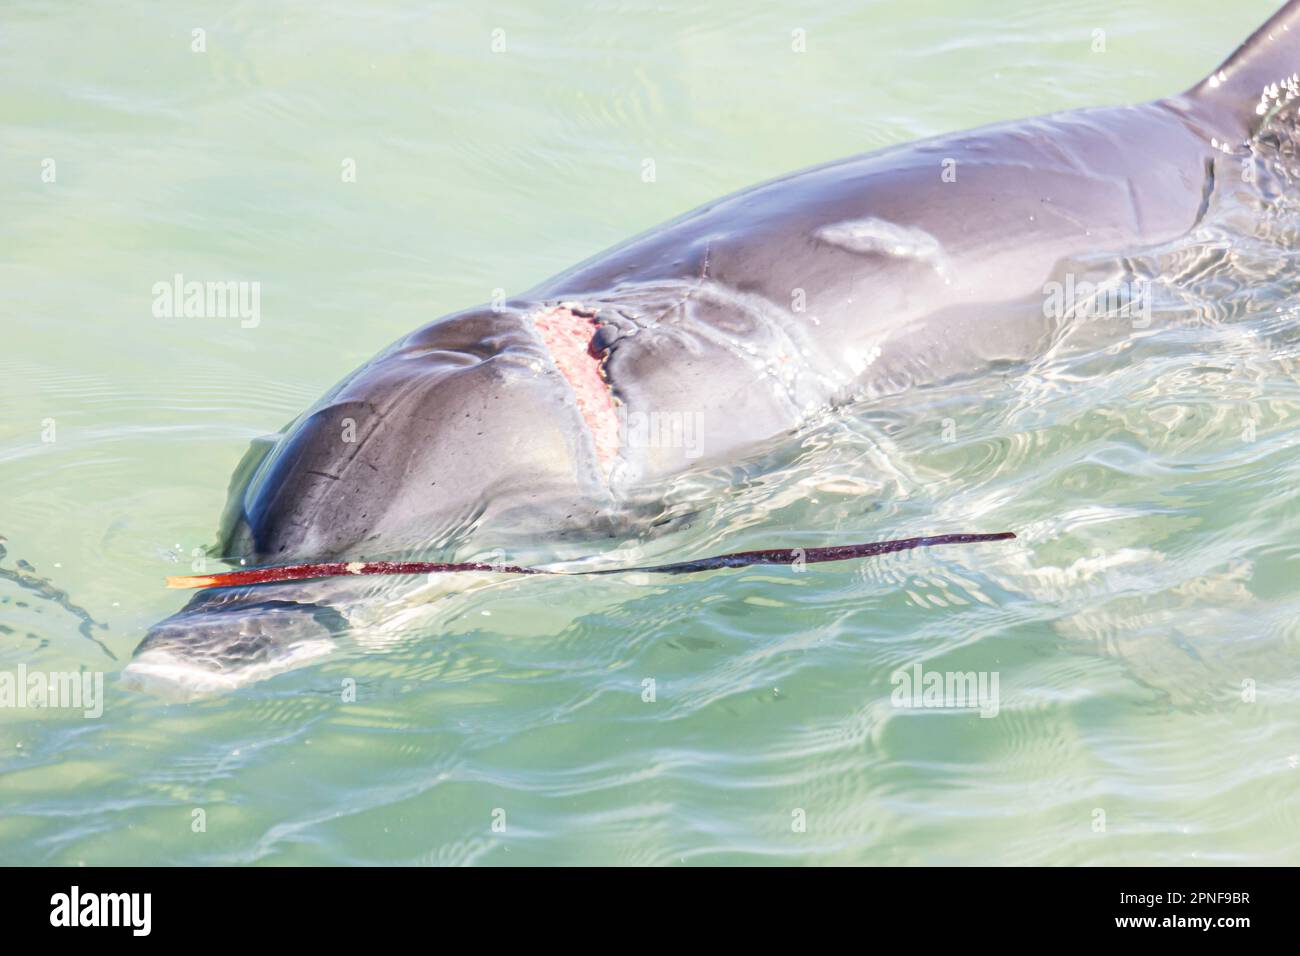 A dolphin with an injury scarred caused by shark attack, swimming in the shallow water of Monkey Mia in Shark Bay of Western Australia, Australia. Stock Photo